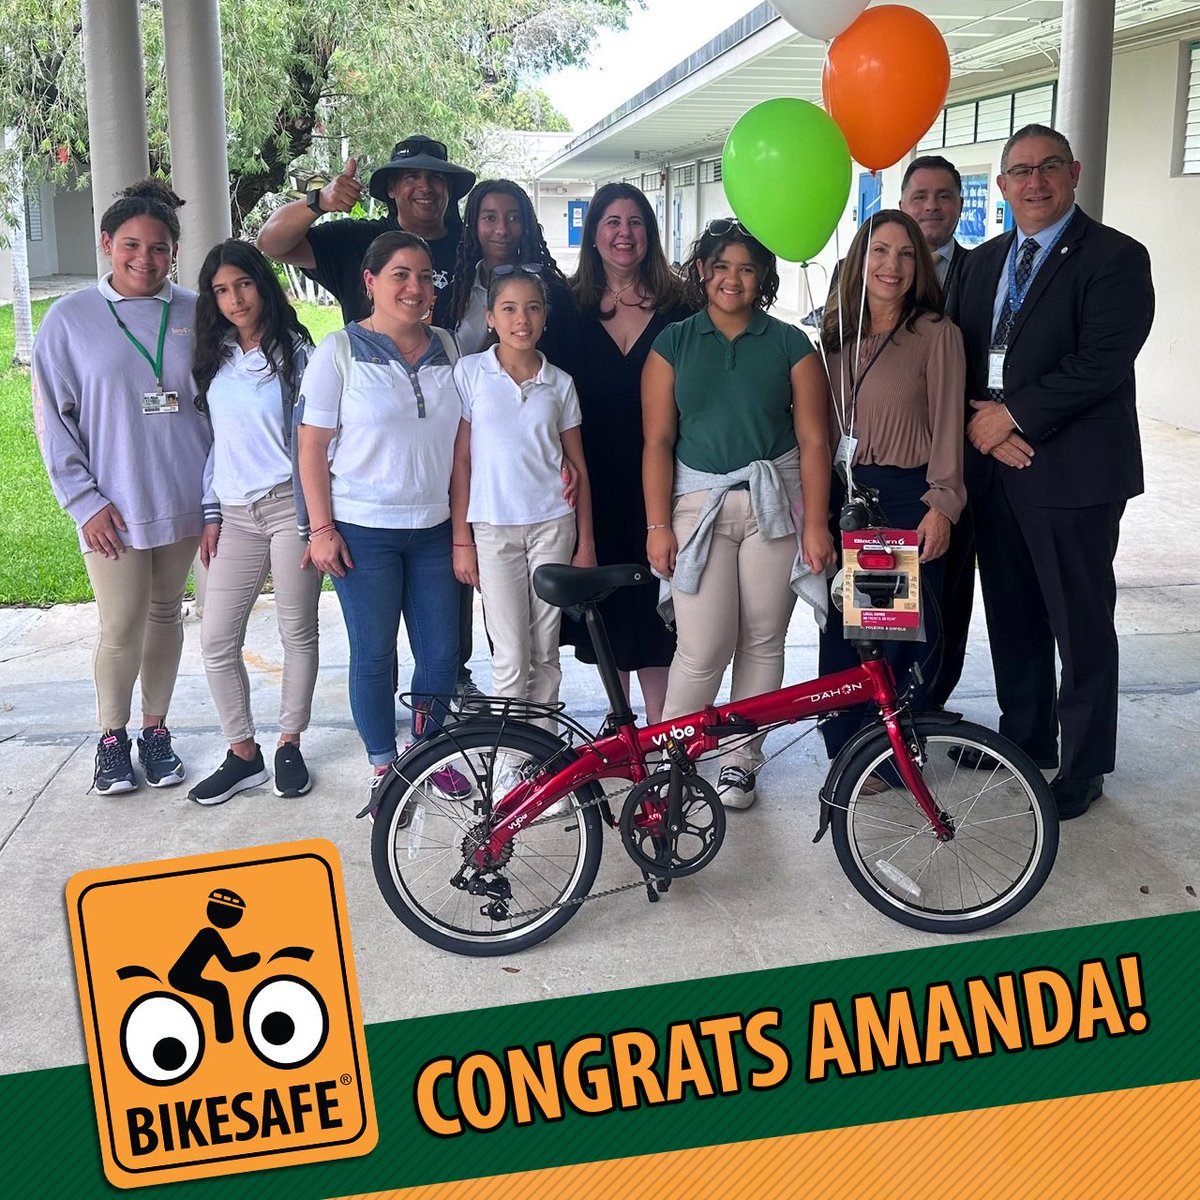 Congratulations to Amanda at @MAMilamK8! 

She was awarded a brand-new bicycle today for her outstanding participation in BikeSafe's Bike Club, an after-school program at select @MDCPS schools.

#bicycleschangelives

@MDCPSCommunity @MDCPSNorth @JuanM8774